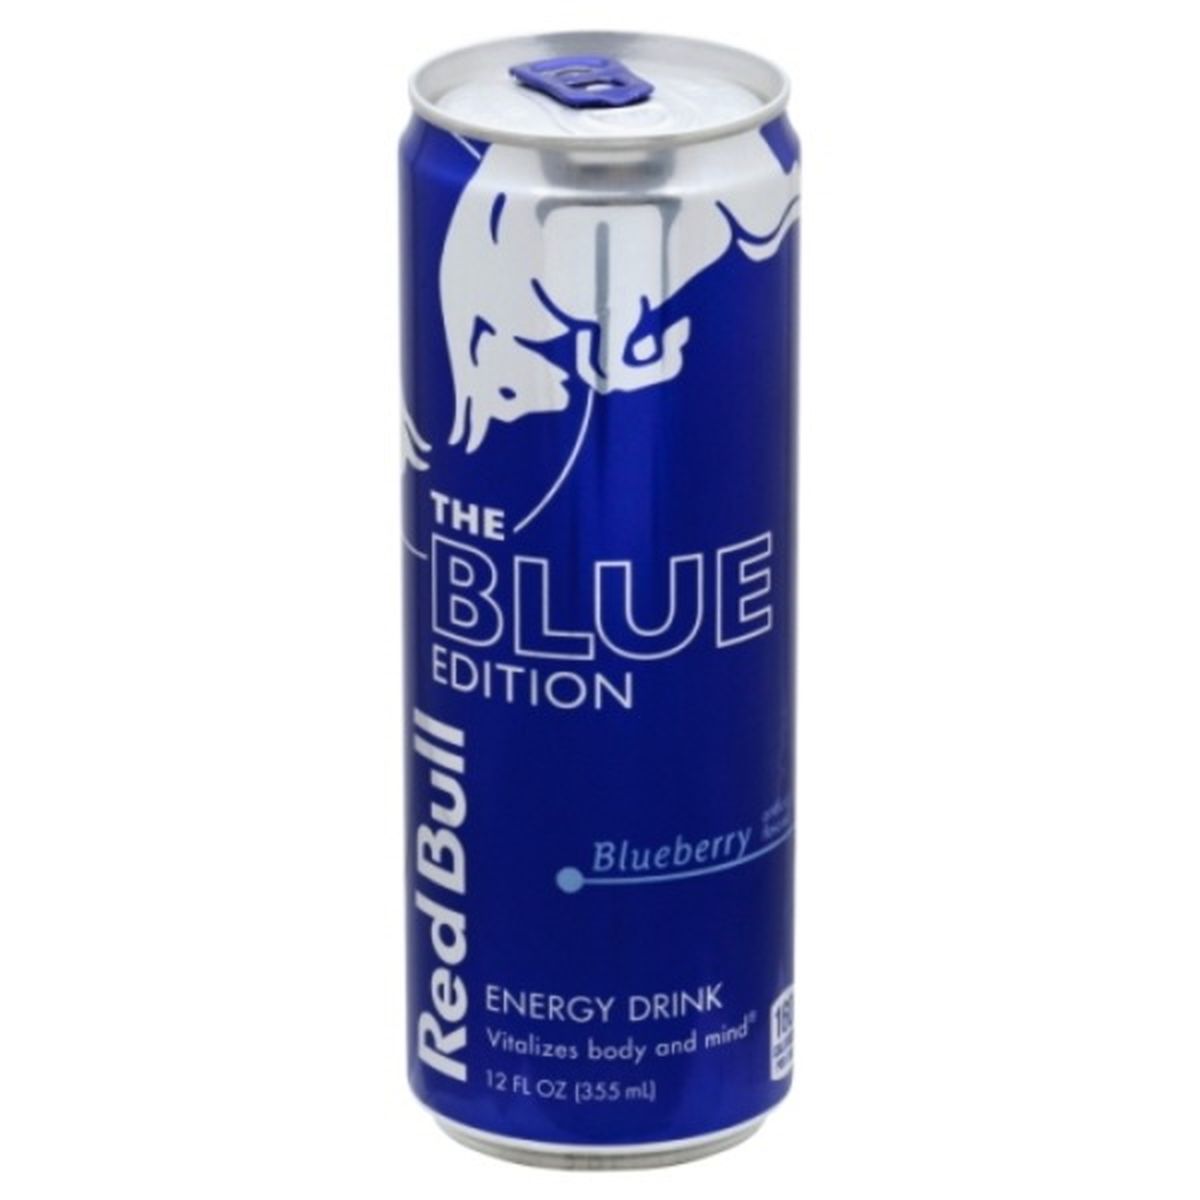 Calories in Red Bull Energy Drink, The Blue Edition, Blueberry